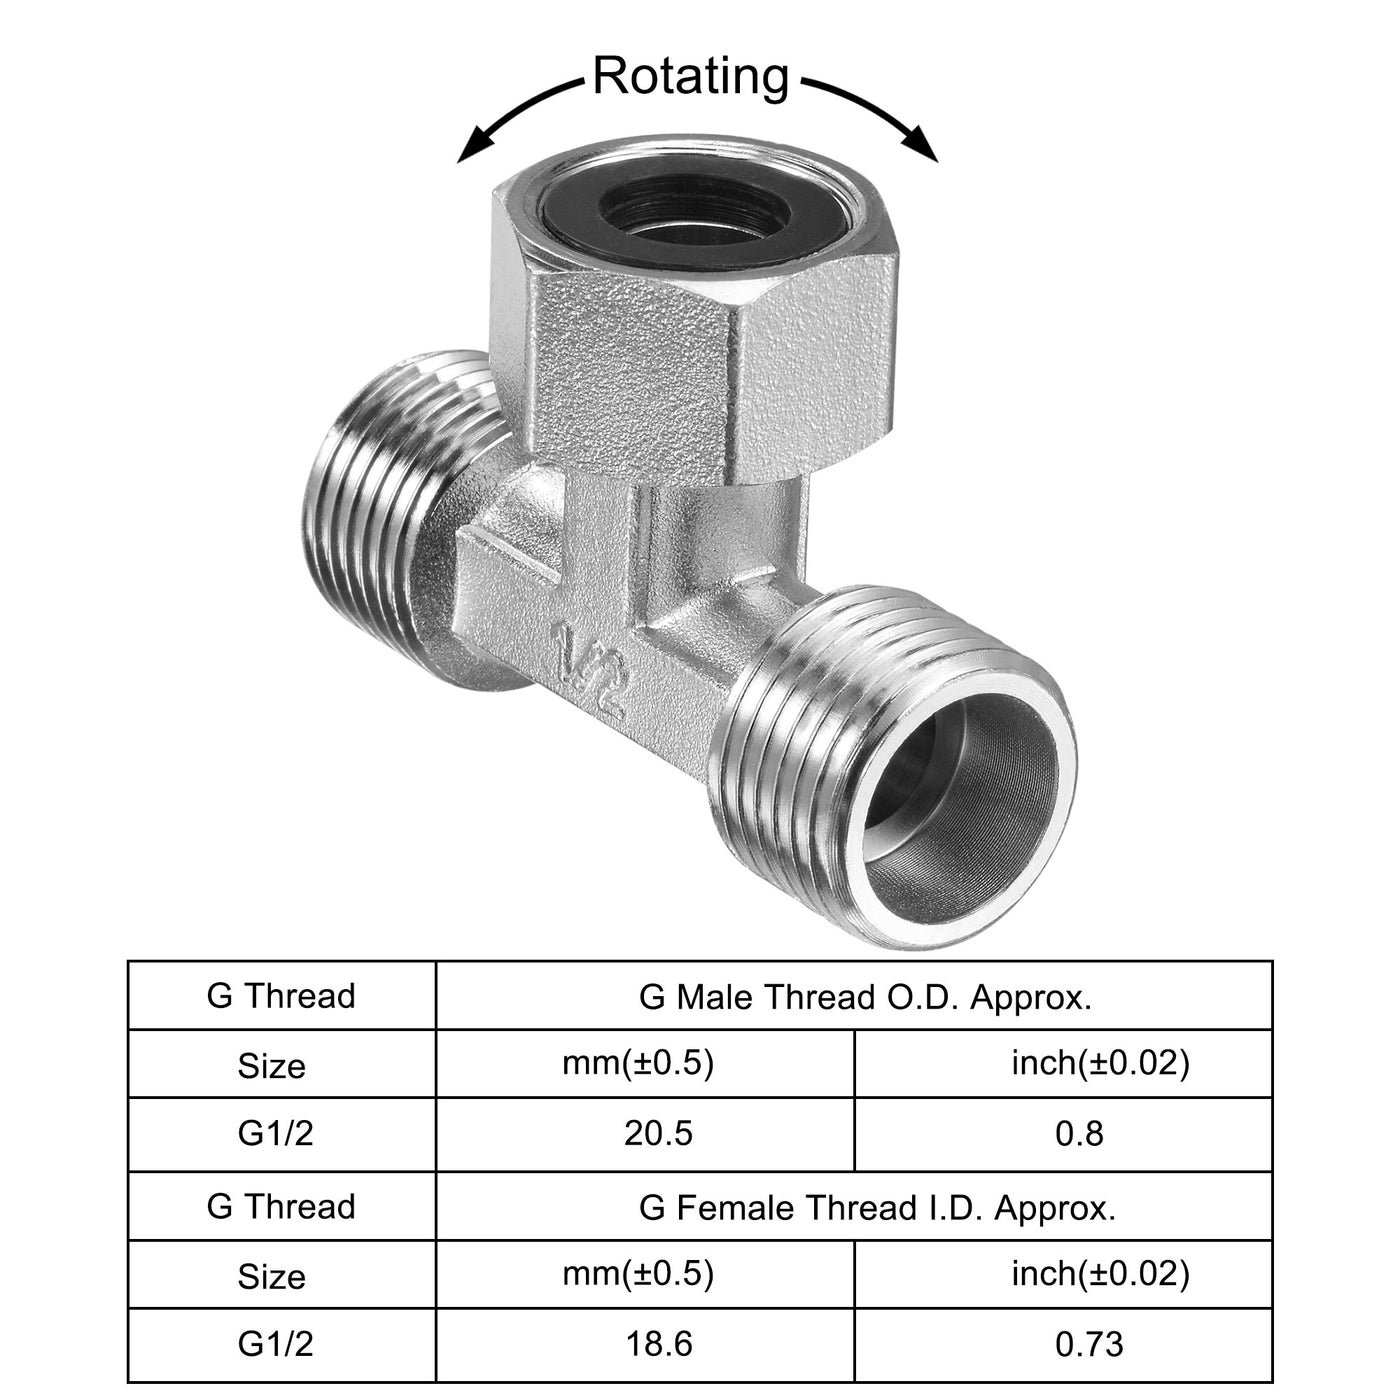 uxcell Uxcell Pipe Fitting Tee G1/2 2 Male to 1 Female Thread 3 Way T Shape Swivel Nut Hose Adapter Connector, Nickel-Plated Copper